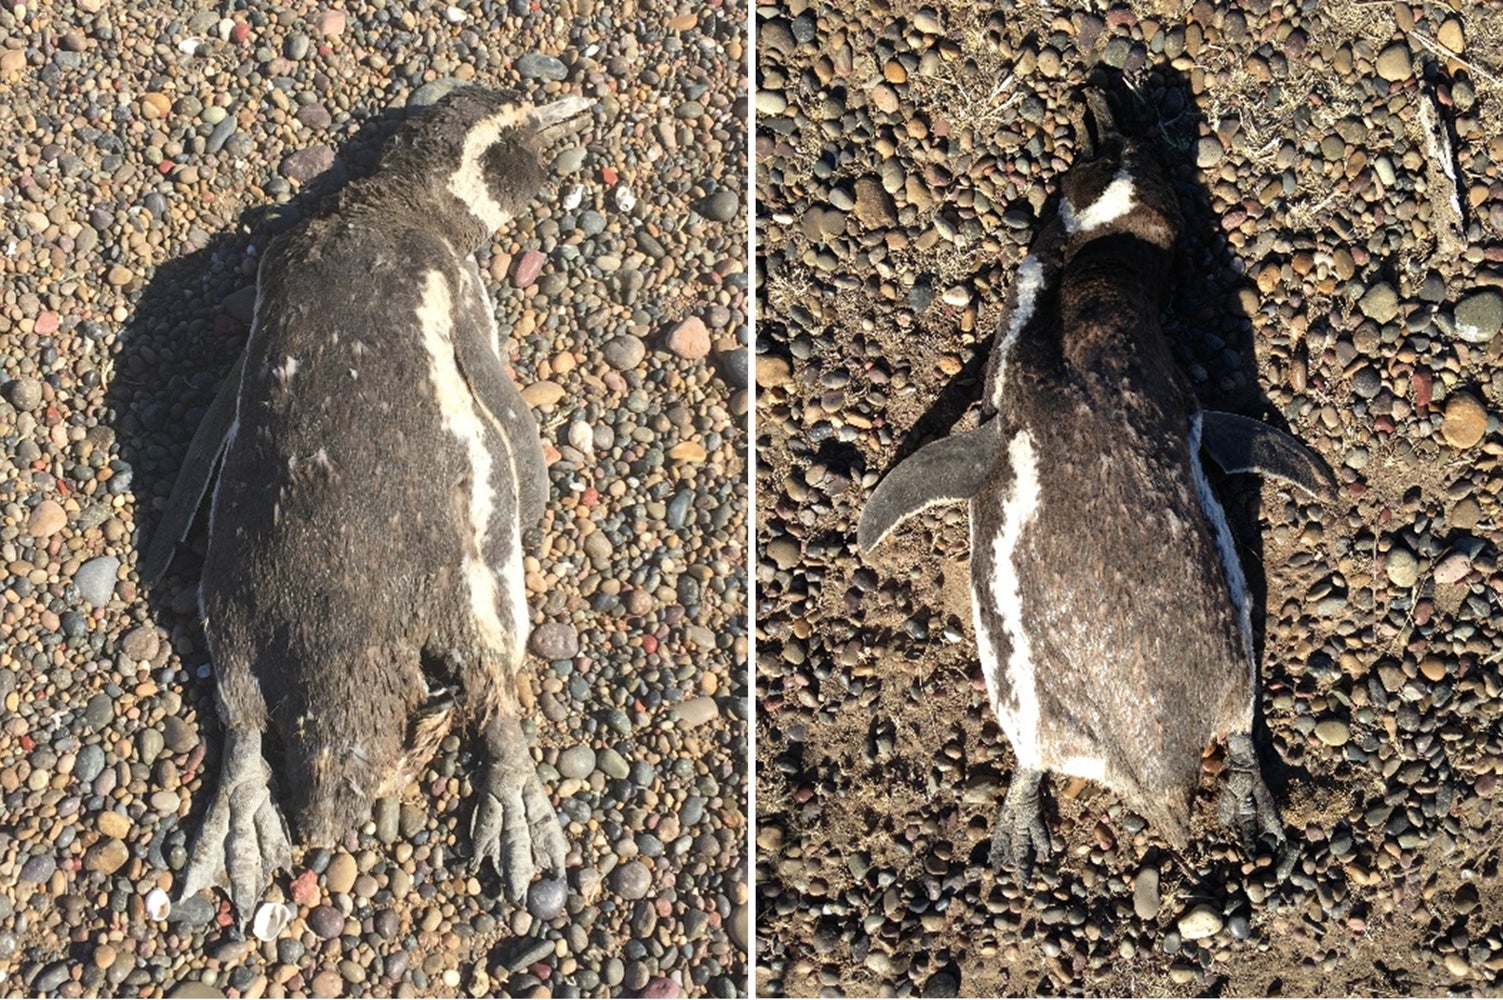 Extreme Heat Killed Hundreds of Magellanic Penguins on a Single Day in 2019